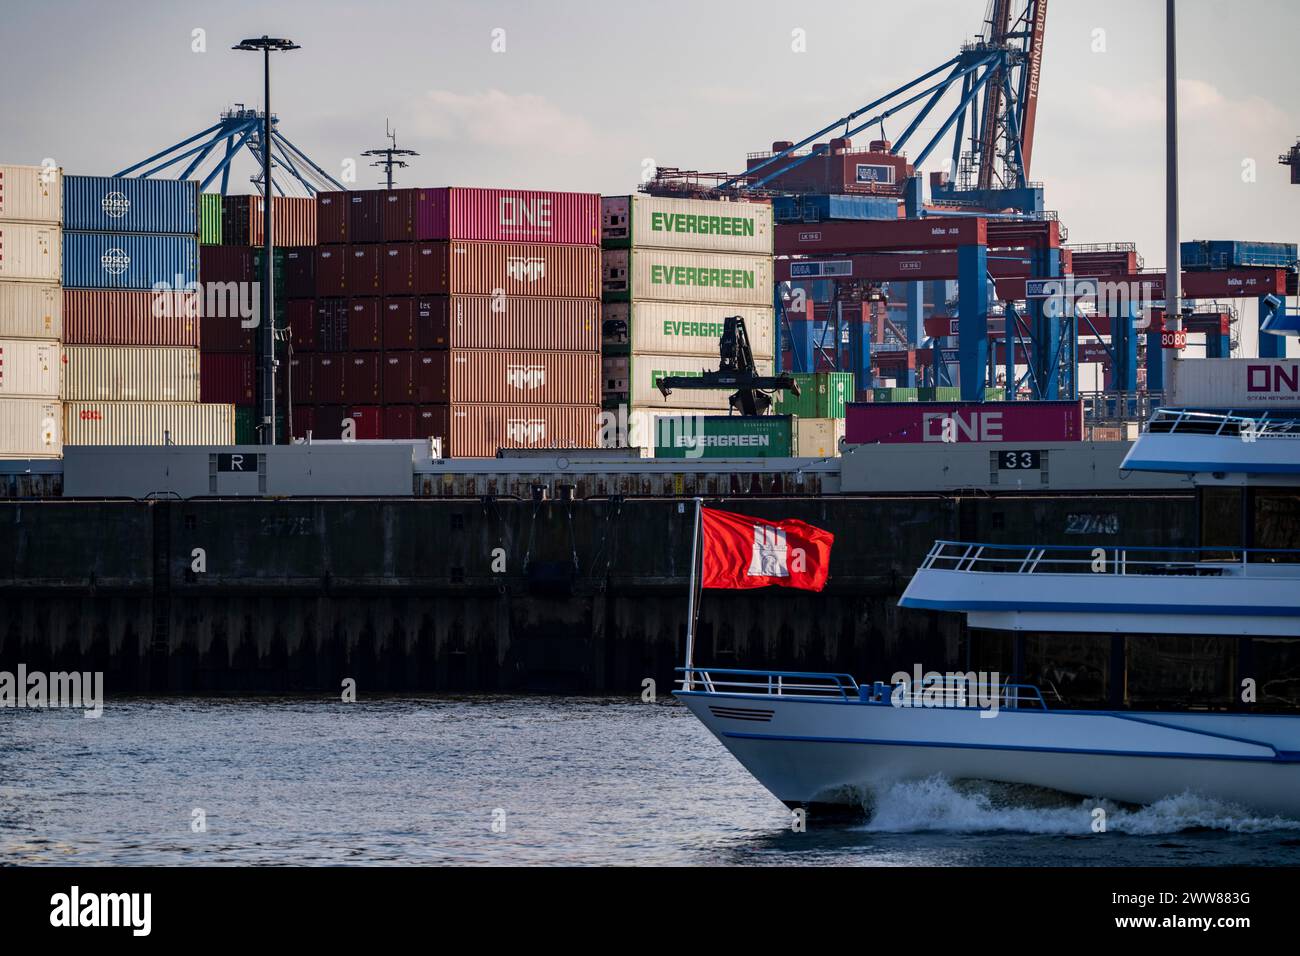 Excursion boat, harbor tour, on the Elbe, in front of the Burchardkai Container Terminal, Hamburg, Germany Stock Photo